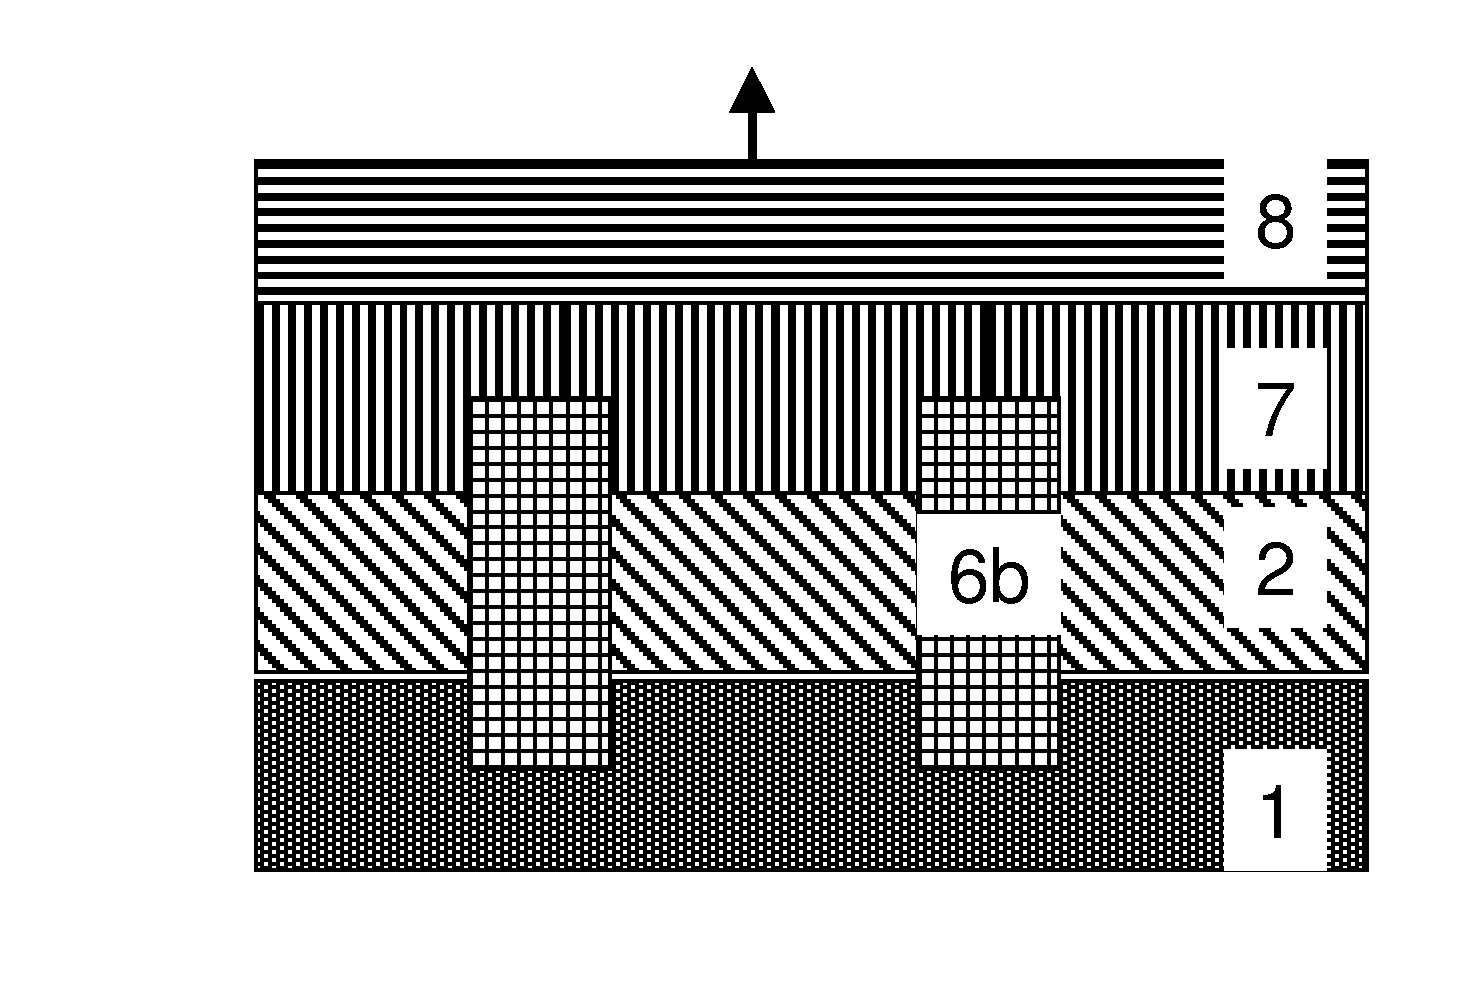 Method for Growing III-V Epitaxial Layers